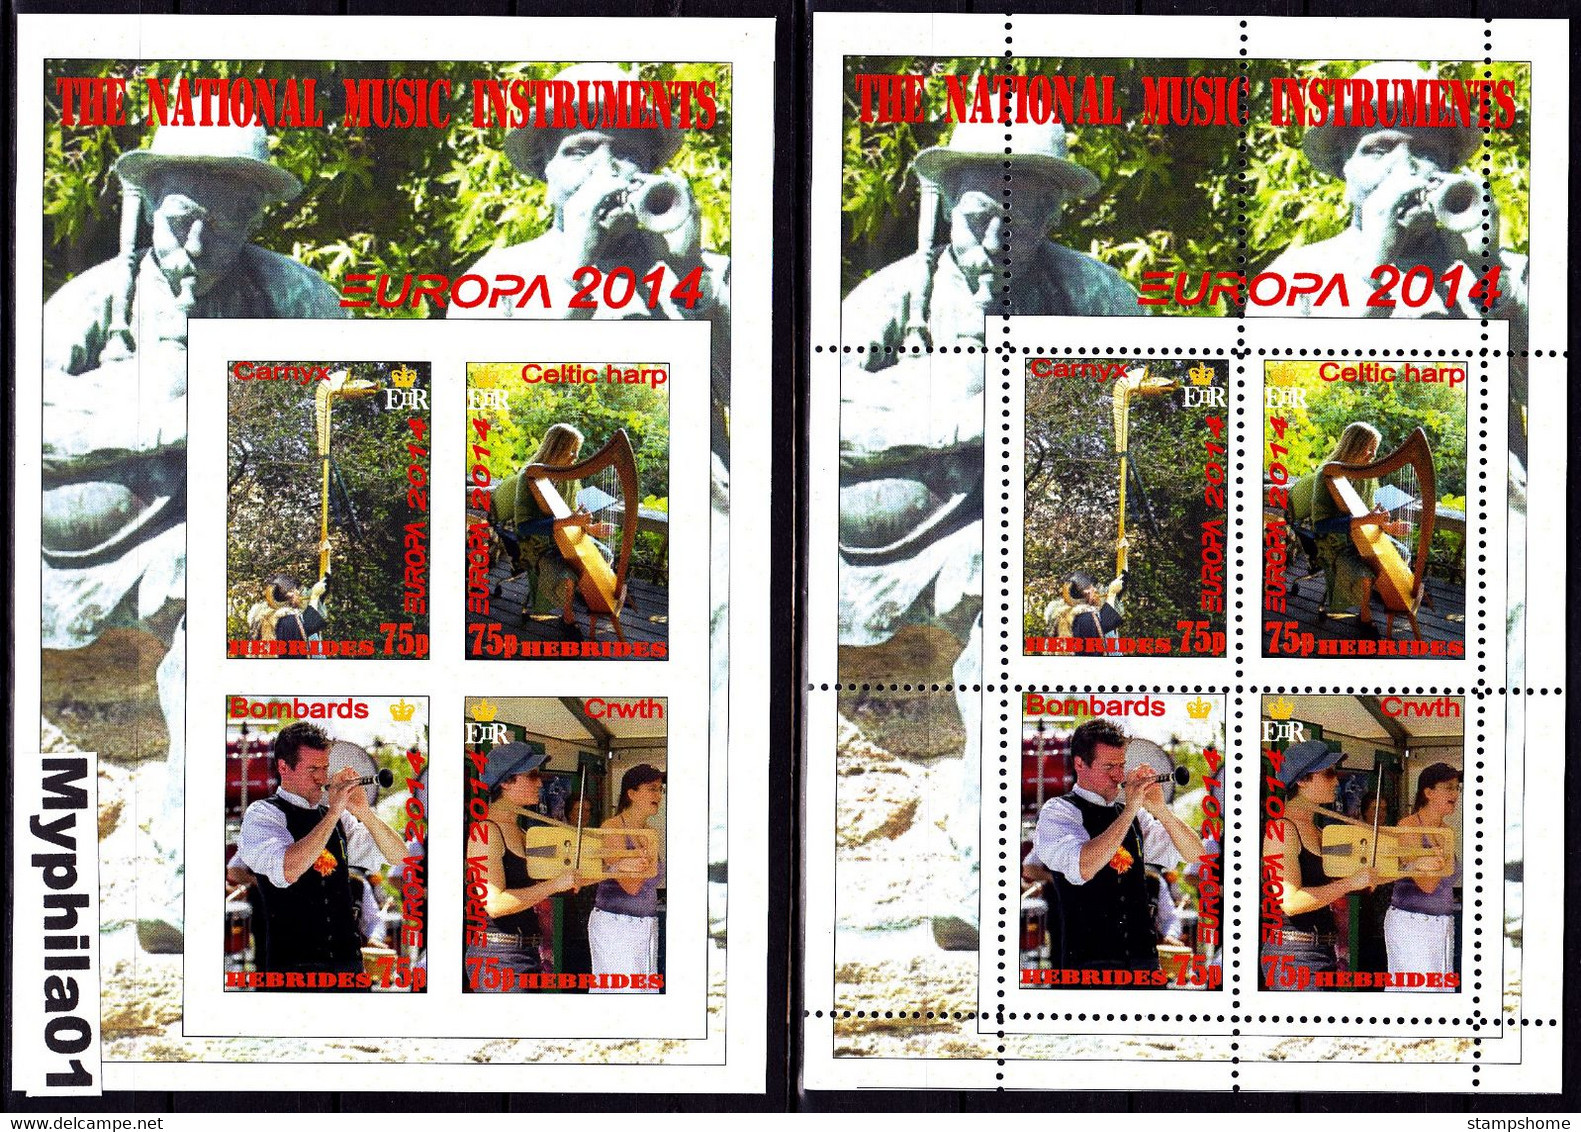 Hebrides - 2014 - Europa Thema & Music - 2.Mini S/Sheet (imp.+perf.) Private İssue ** MNH - Erinnofilie